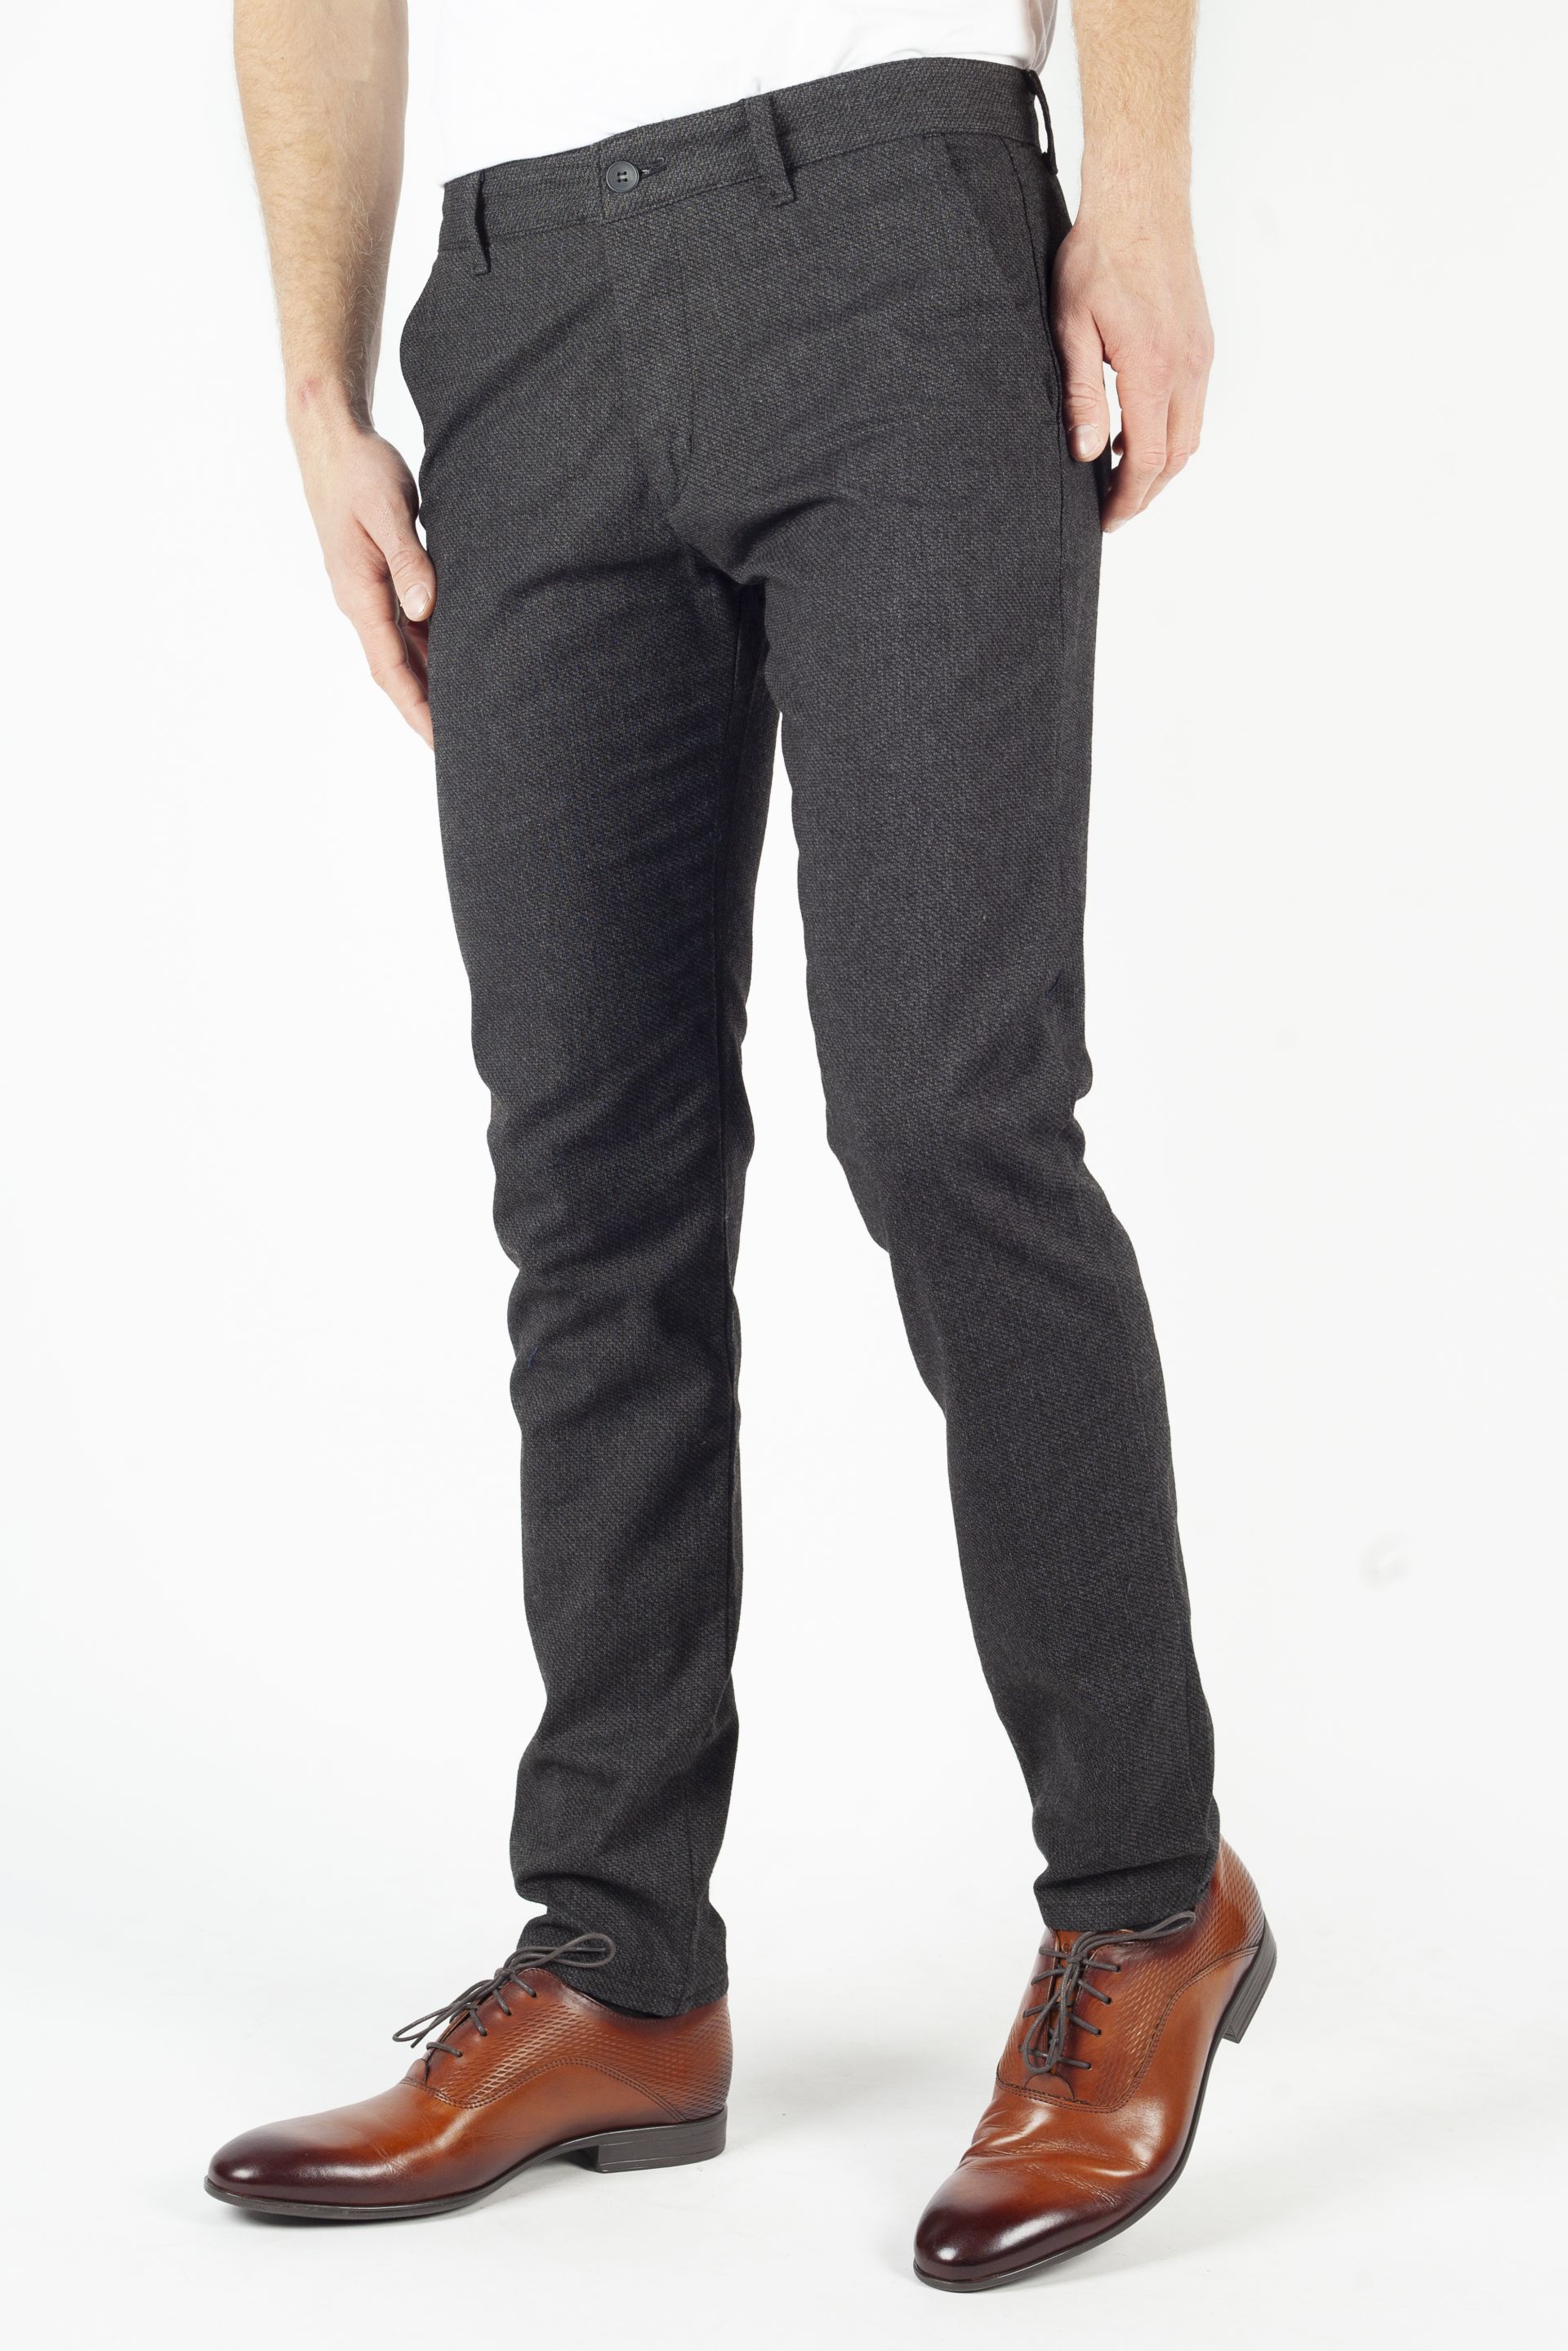 Chino pants BLK JEANS 8376-995-101-201